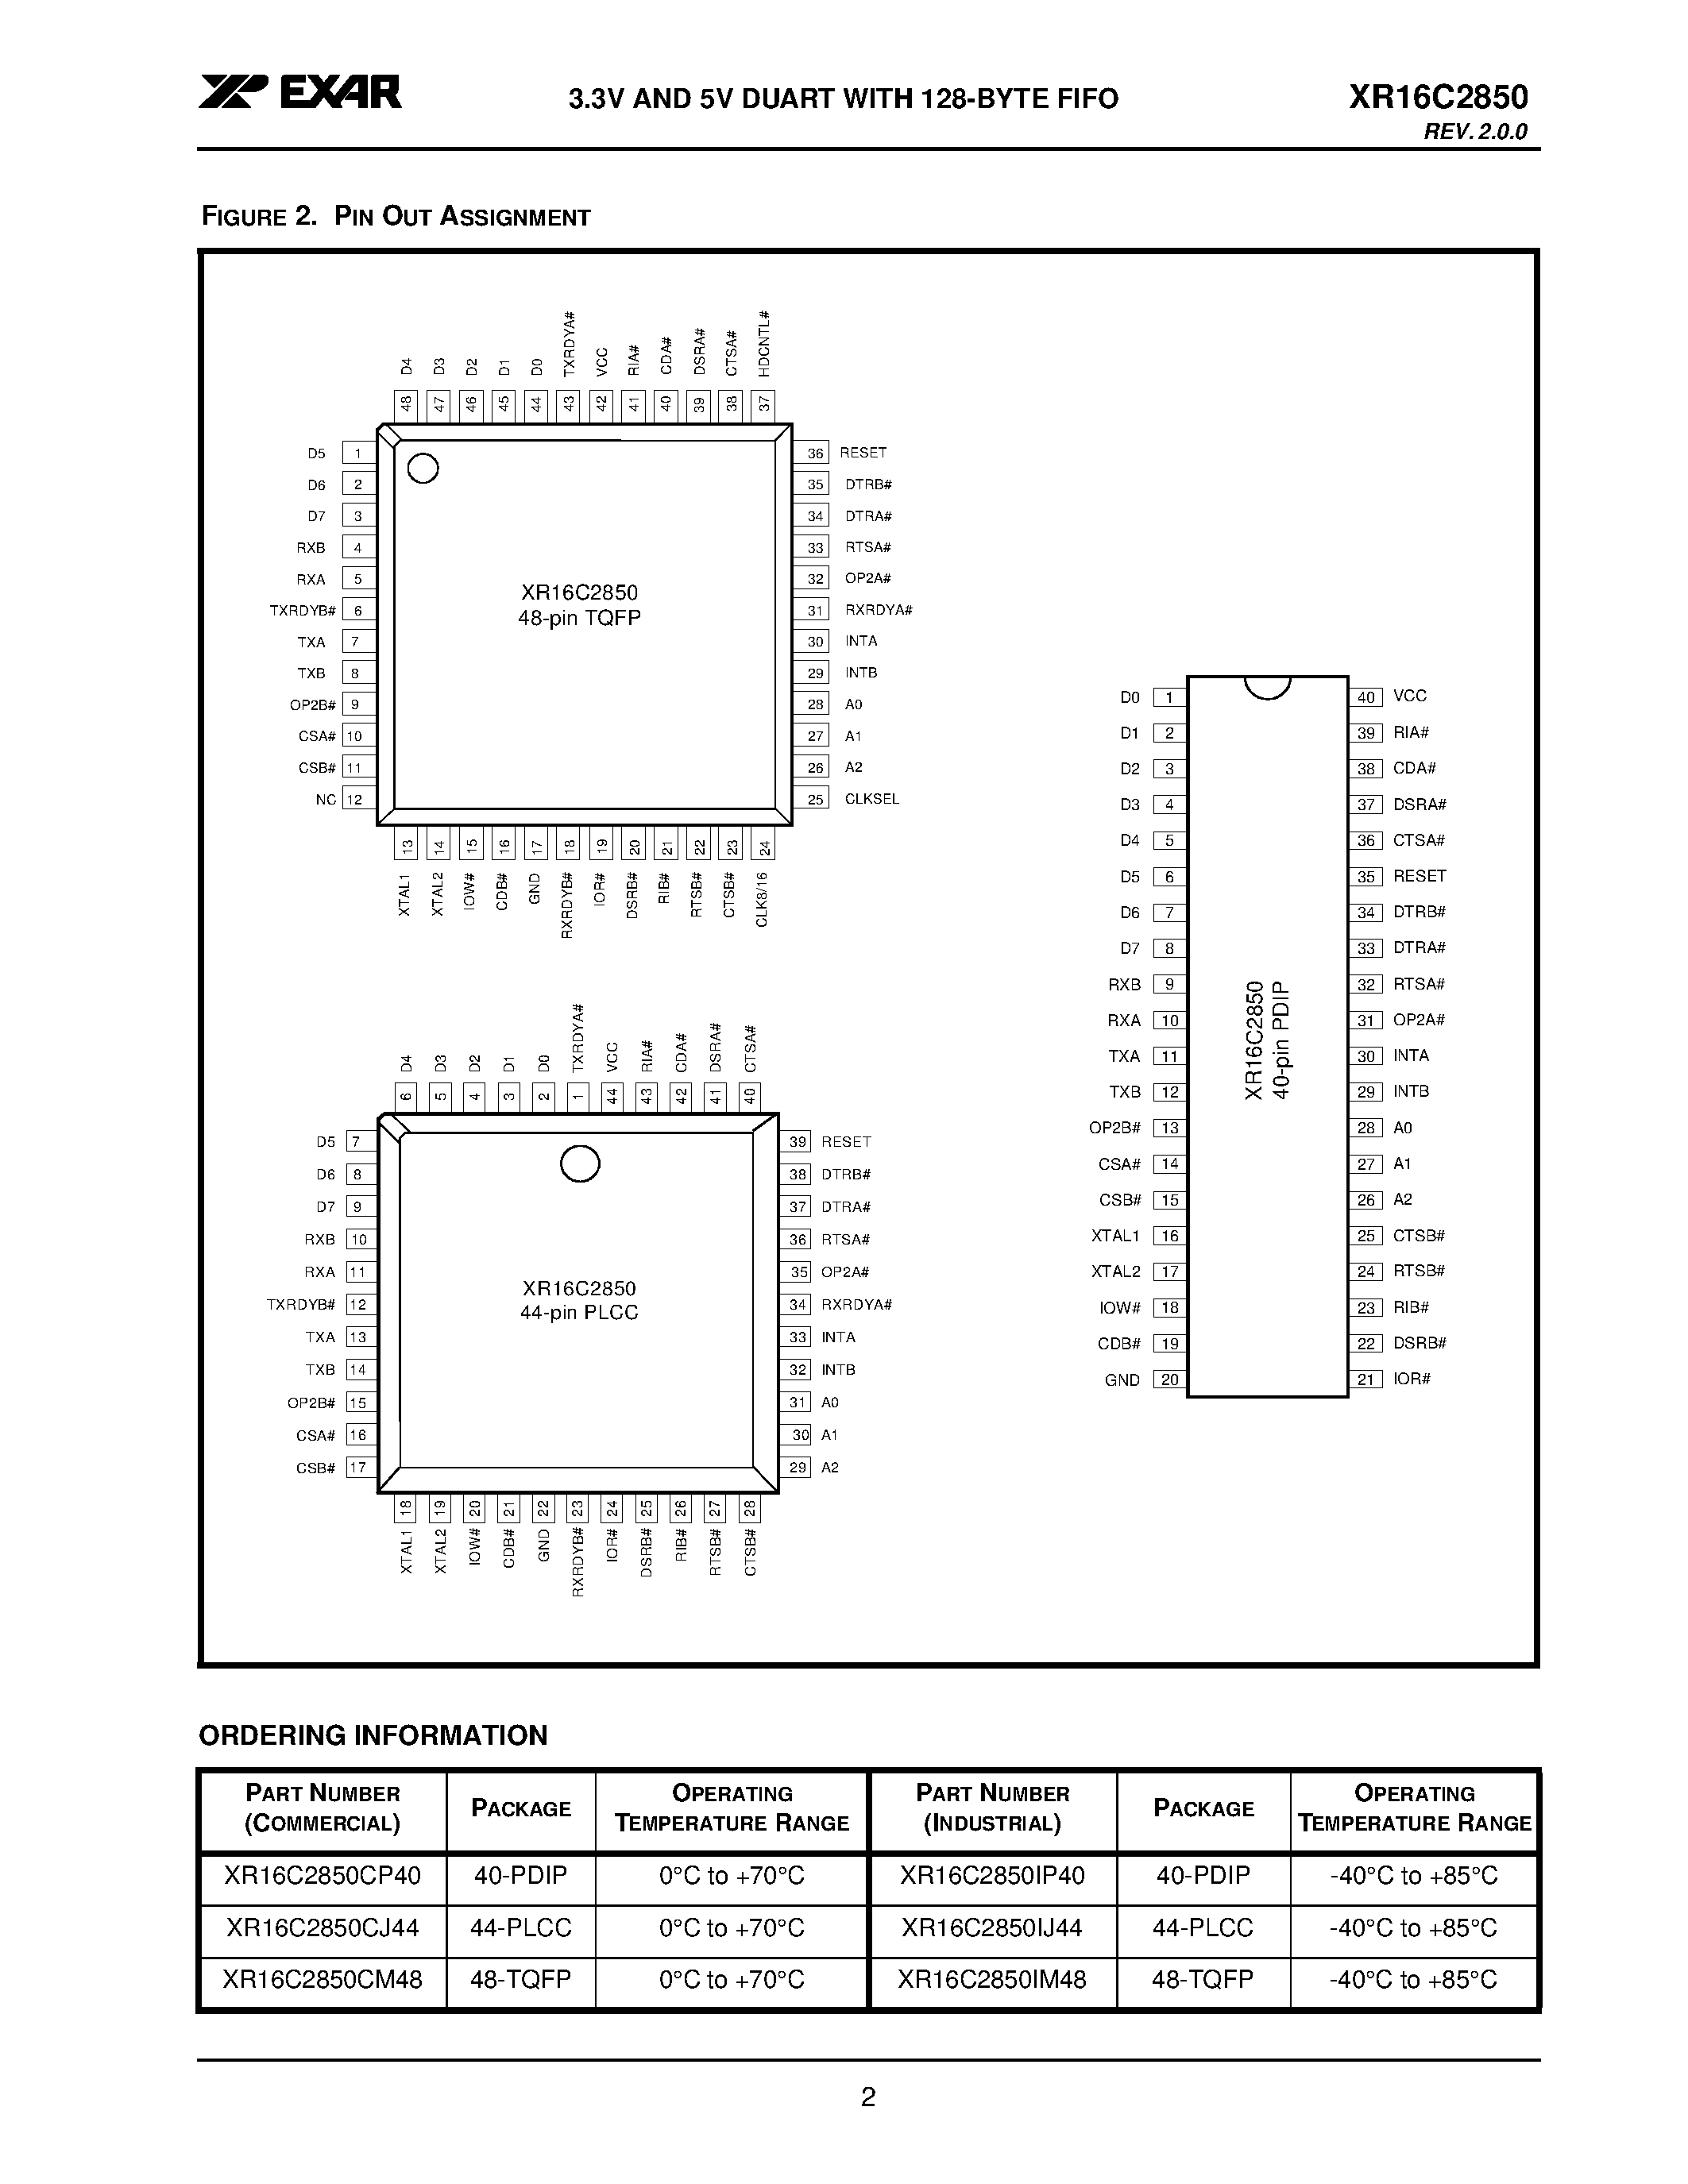 Datasheet XR16C2850CP40 - 3.3V AND 5V DUART WITH 128-BYTE FIFO page 2